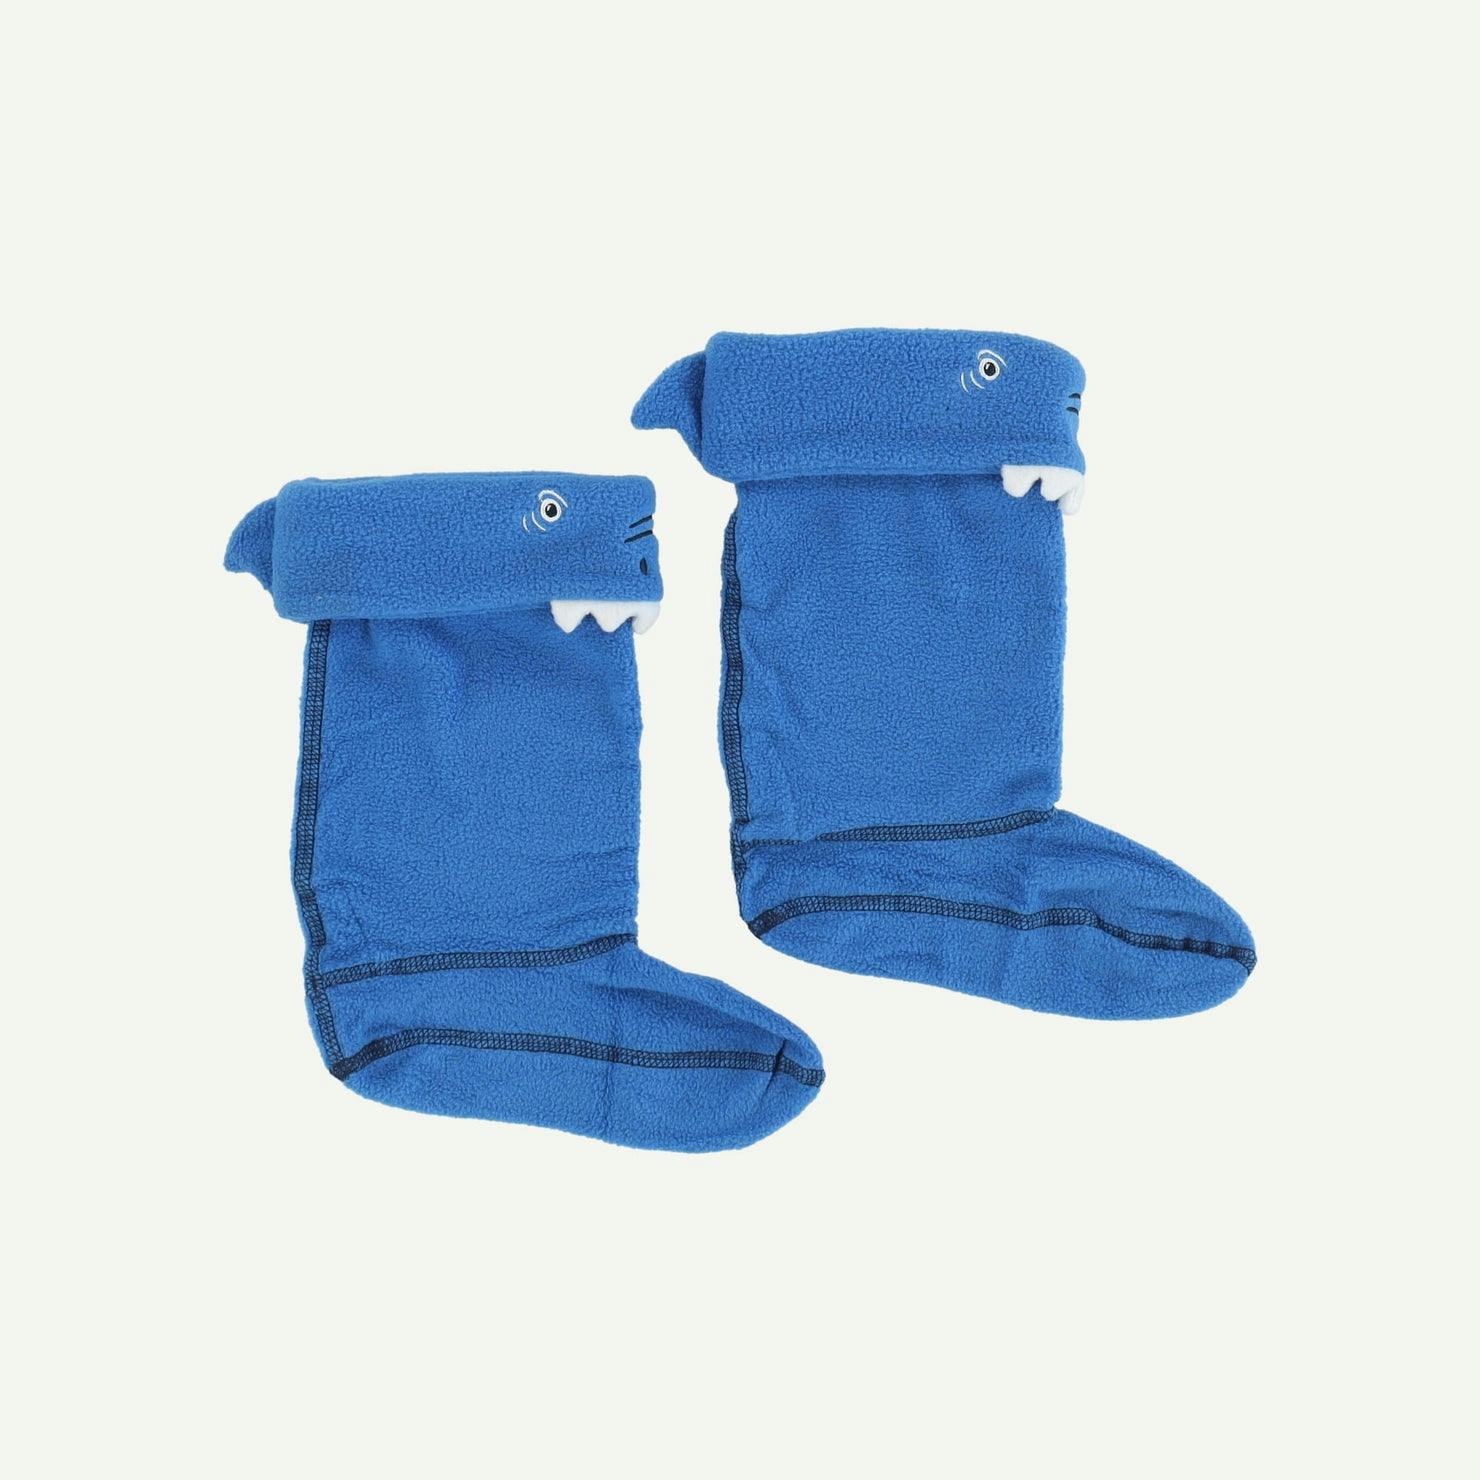 Joules As new Blue Socks